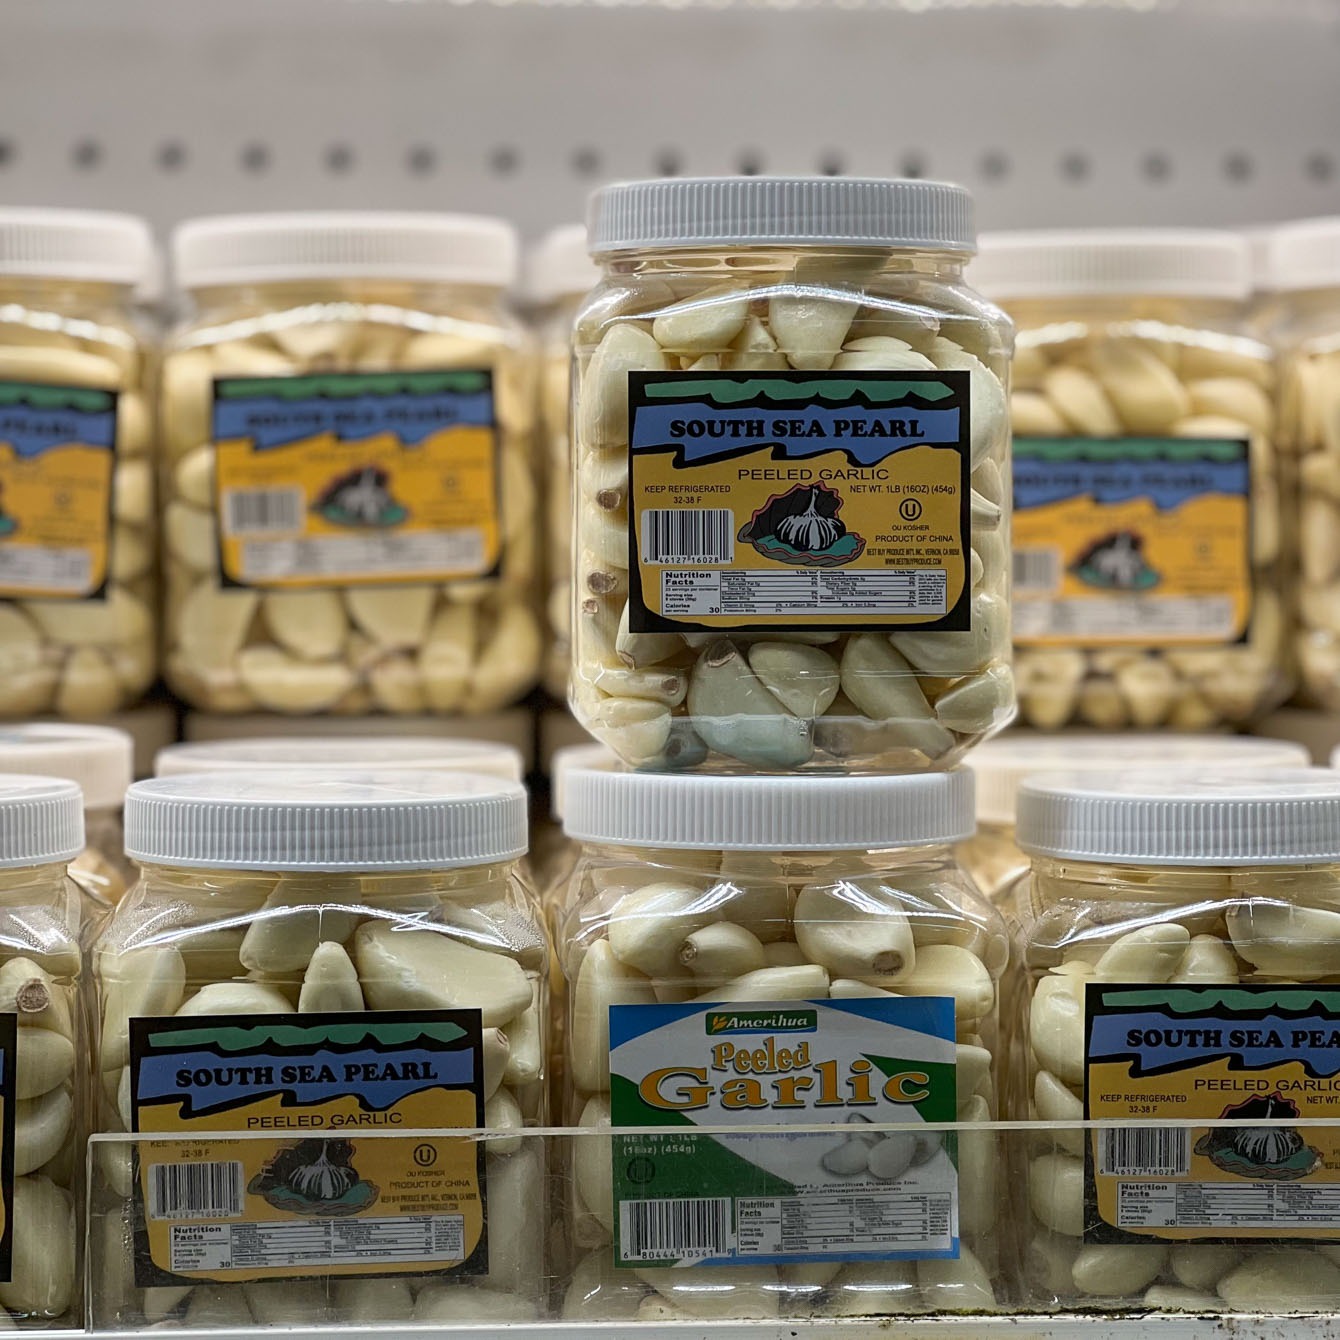 Peeled garlic cloves are sold in a jar